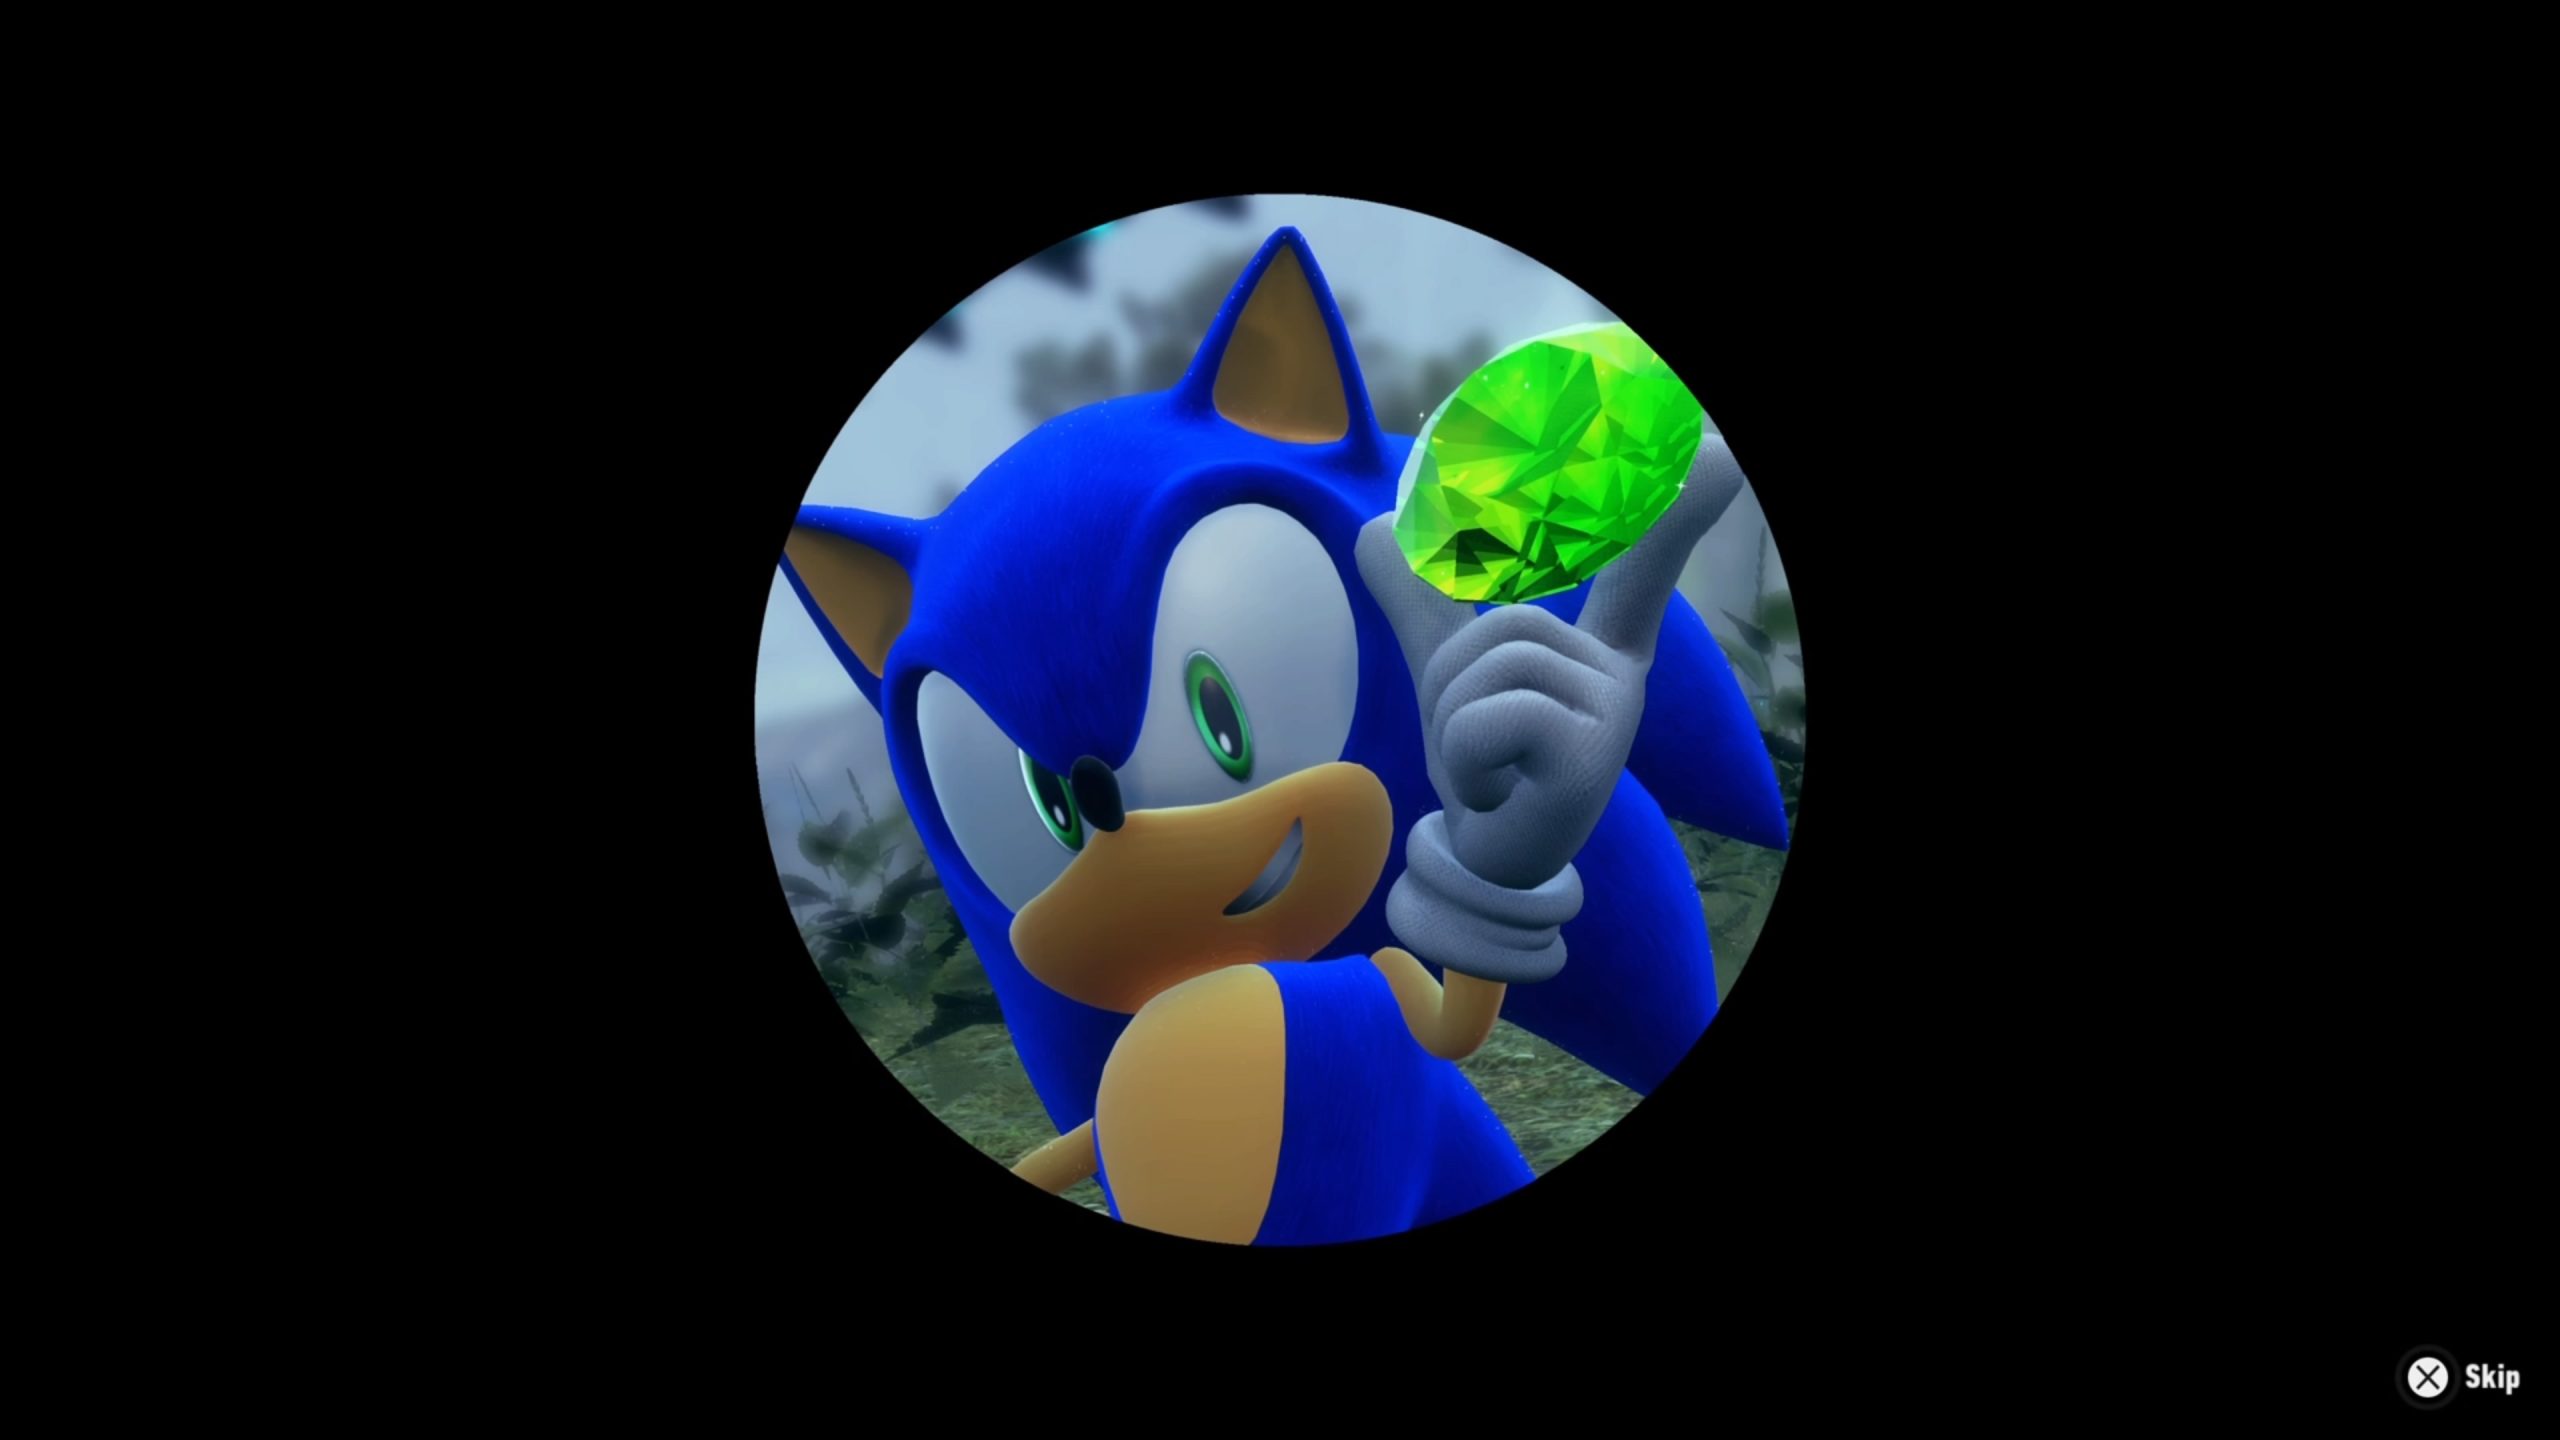 Fans are calling Sonic Frontiers' DLC 'the hardest gameplay in any Sonic  game' : r/XboxSeriesX